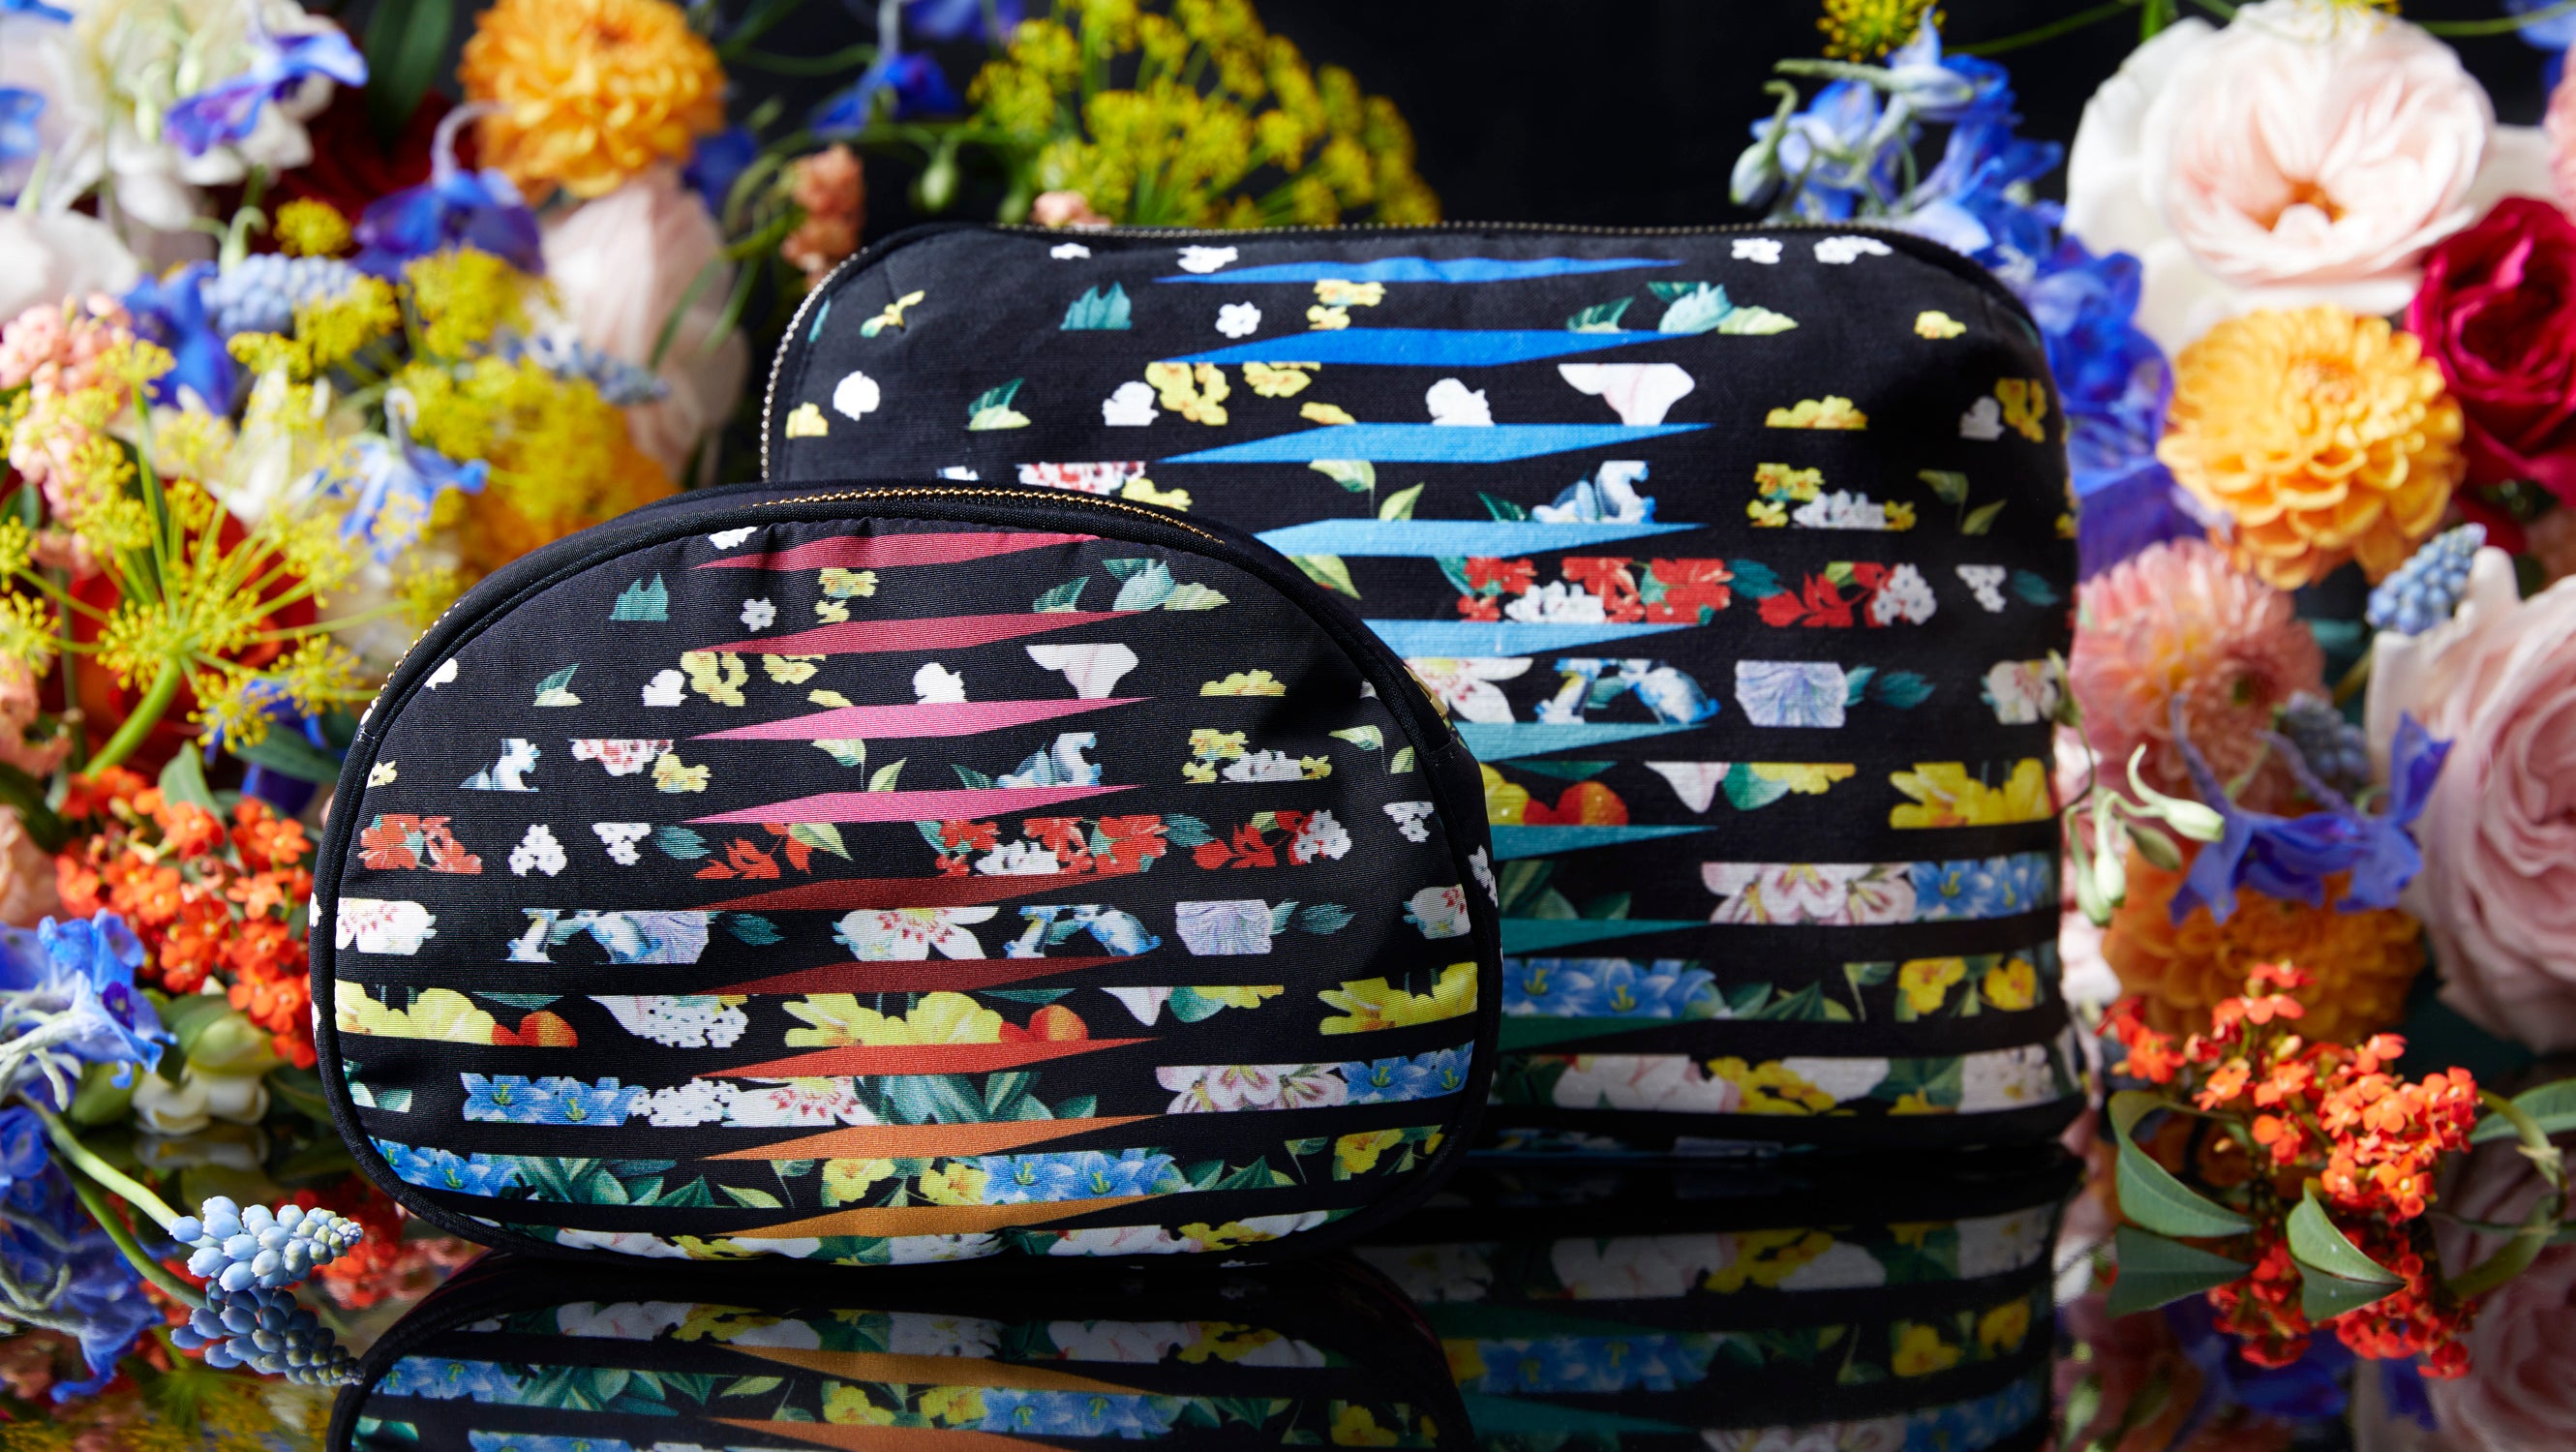 Kirsty Whyte & MARY KATRANTZOU Collaboration for Cowshed & Soho House